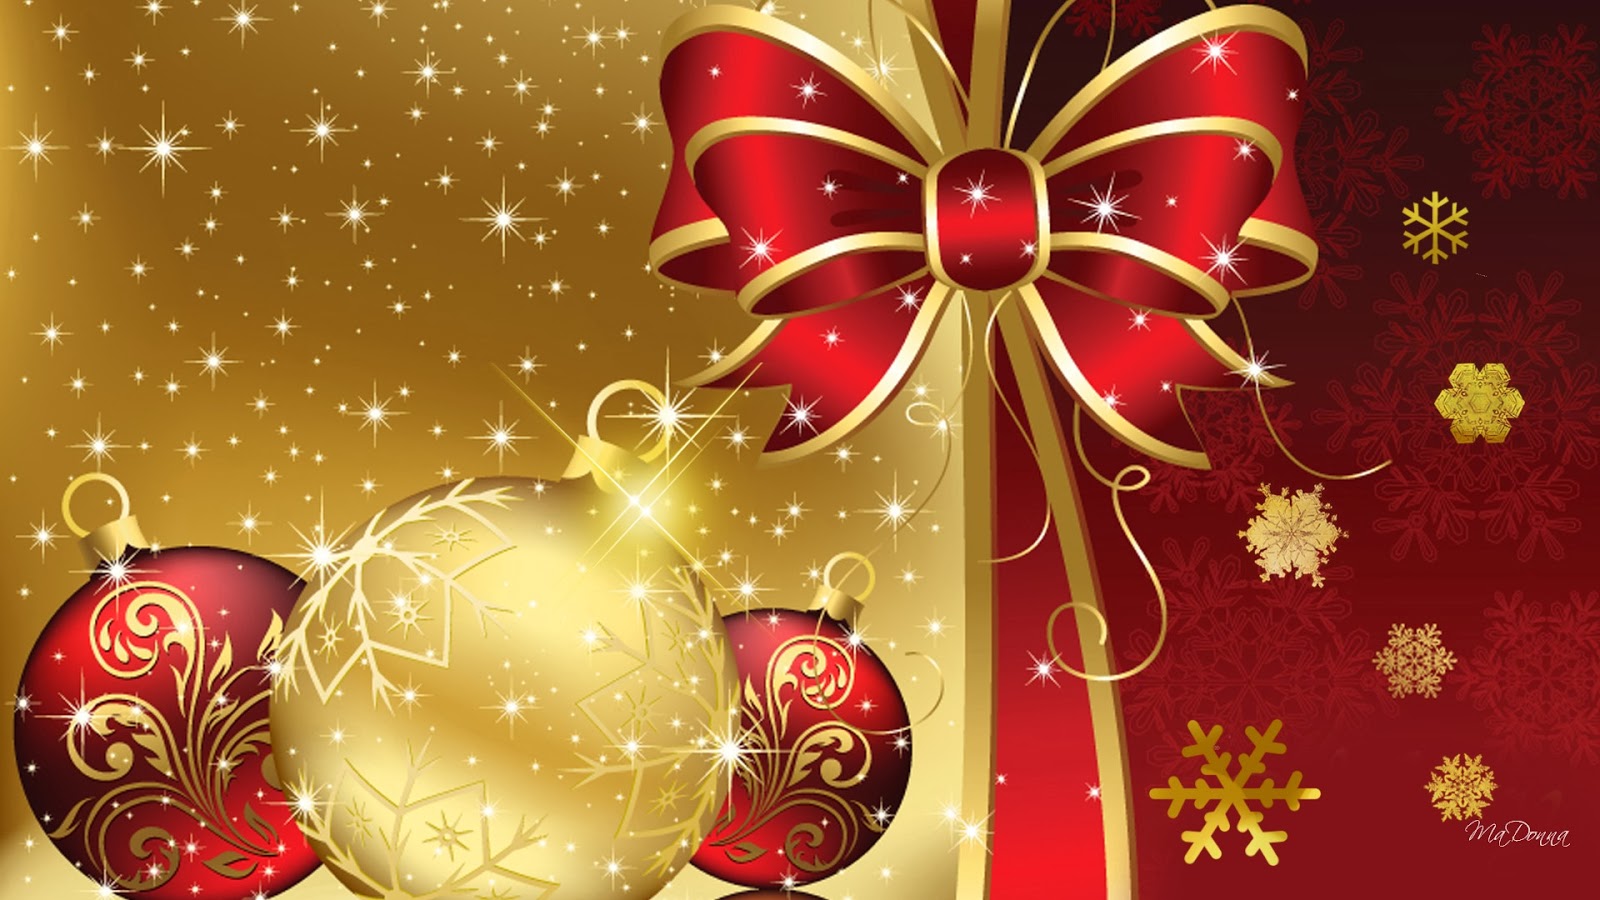 Merry Christmas Hd Wallpapers 1080p Technology - Merry Christmas Clip Art Free - HD Wallpaper 